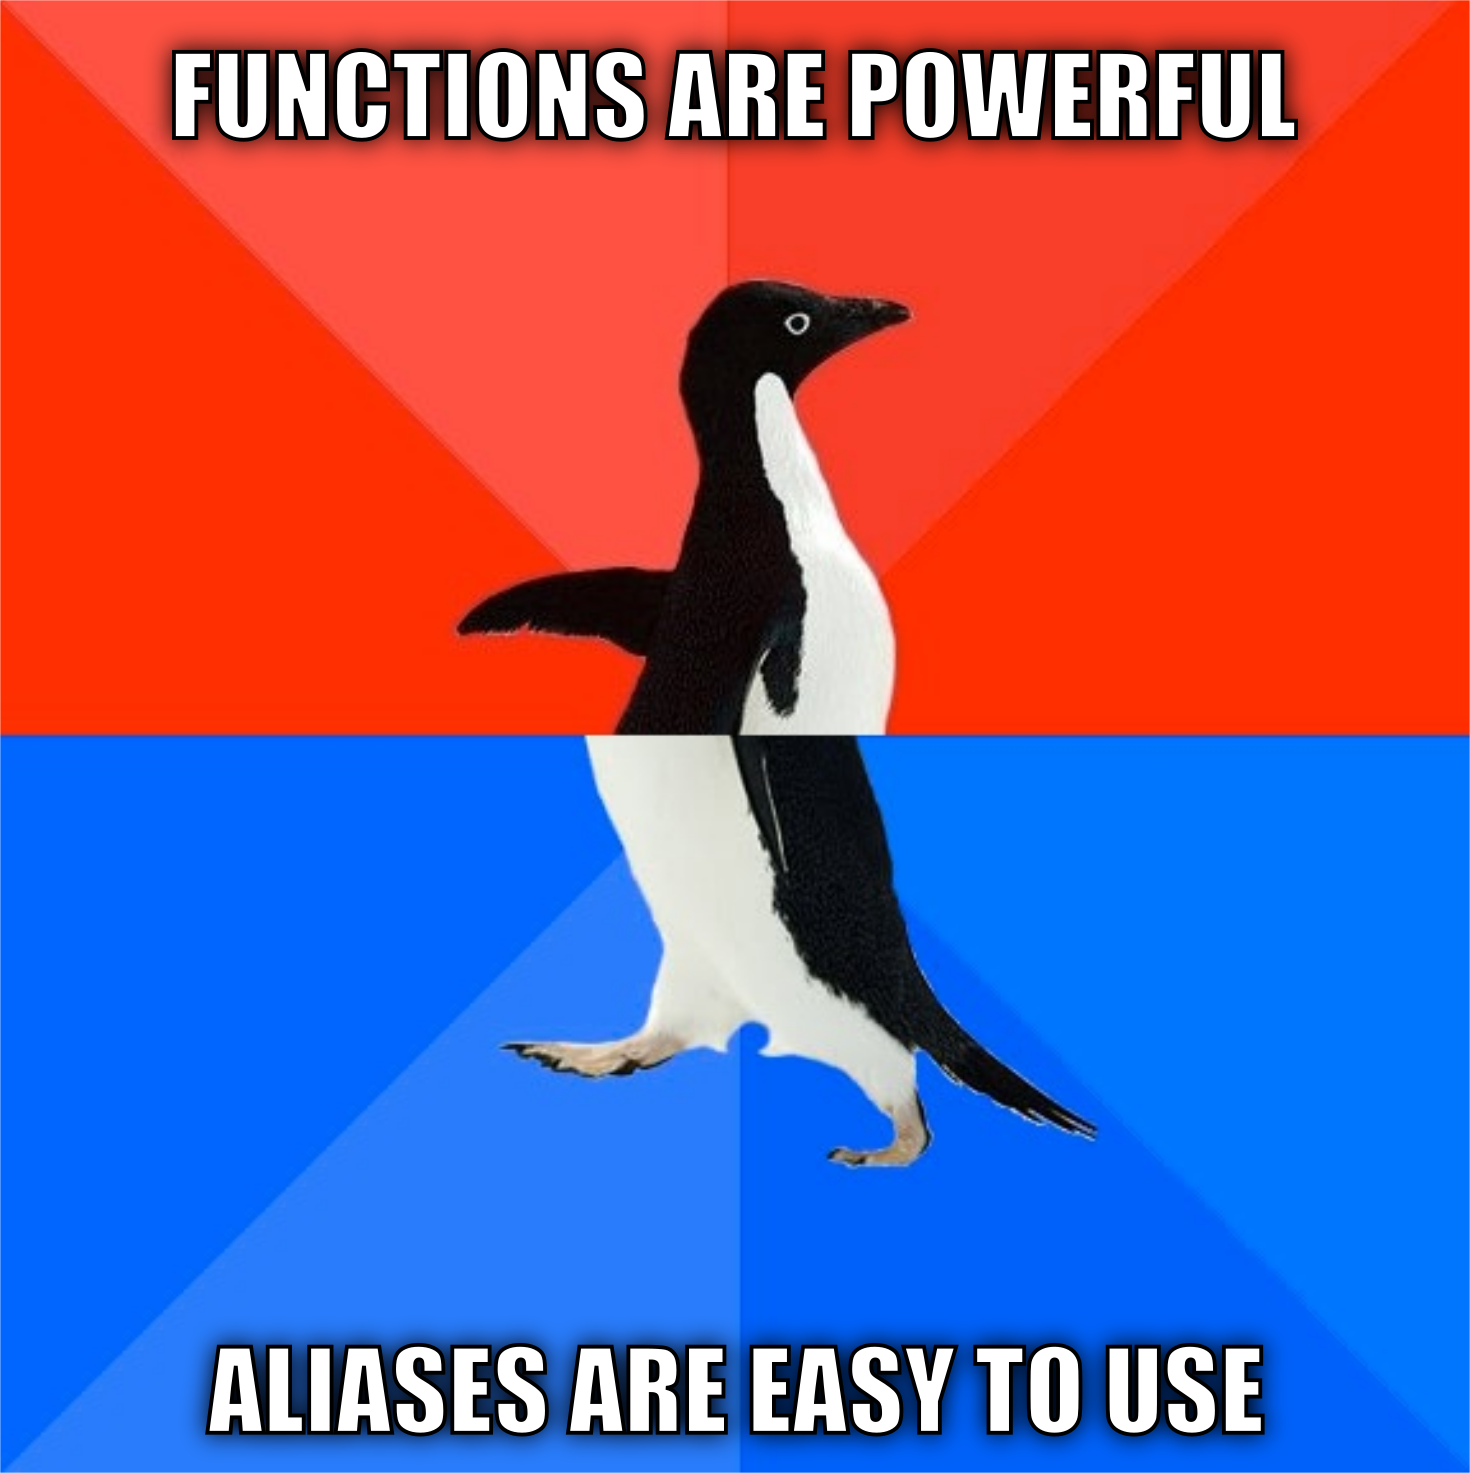 Functions are more powerful, but aliases are simplier to use.